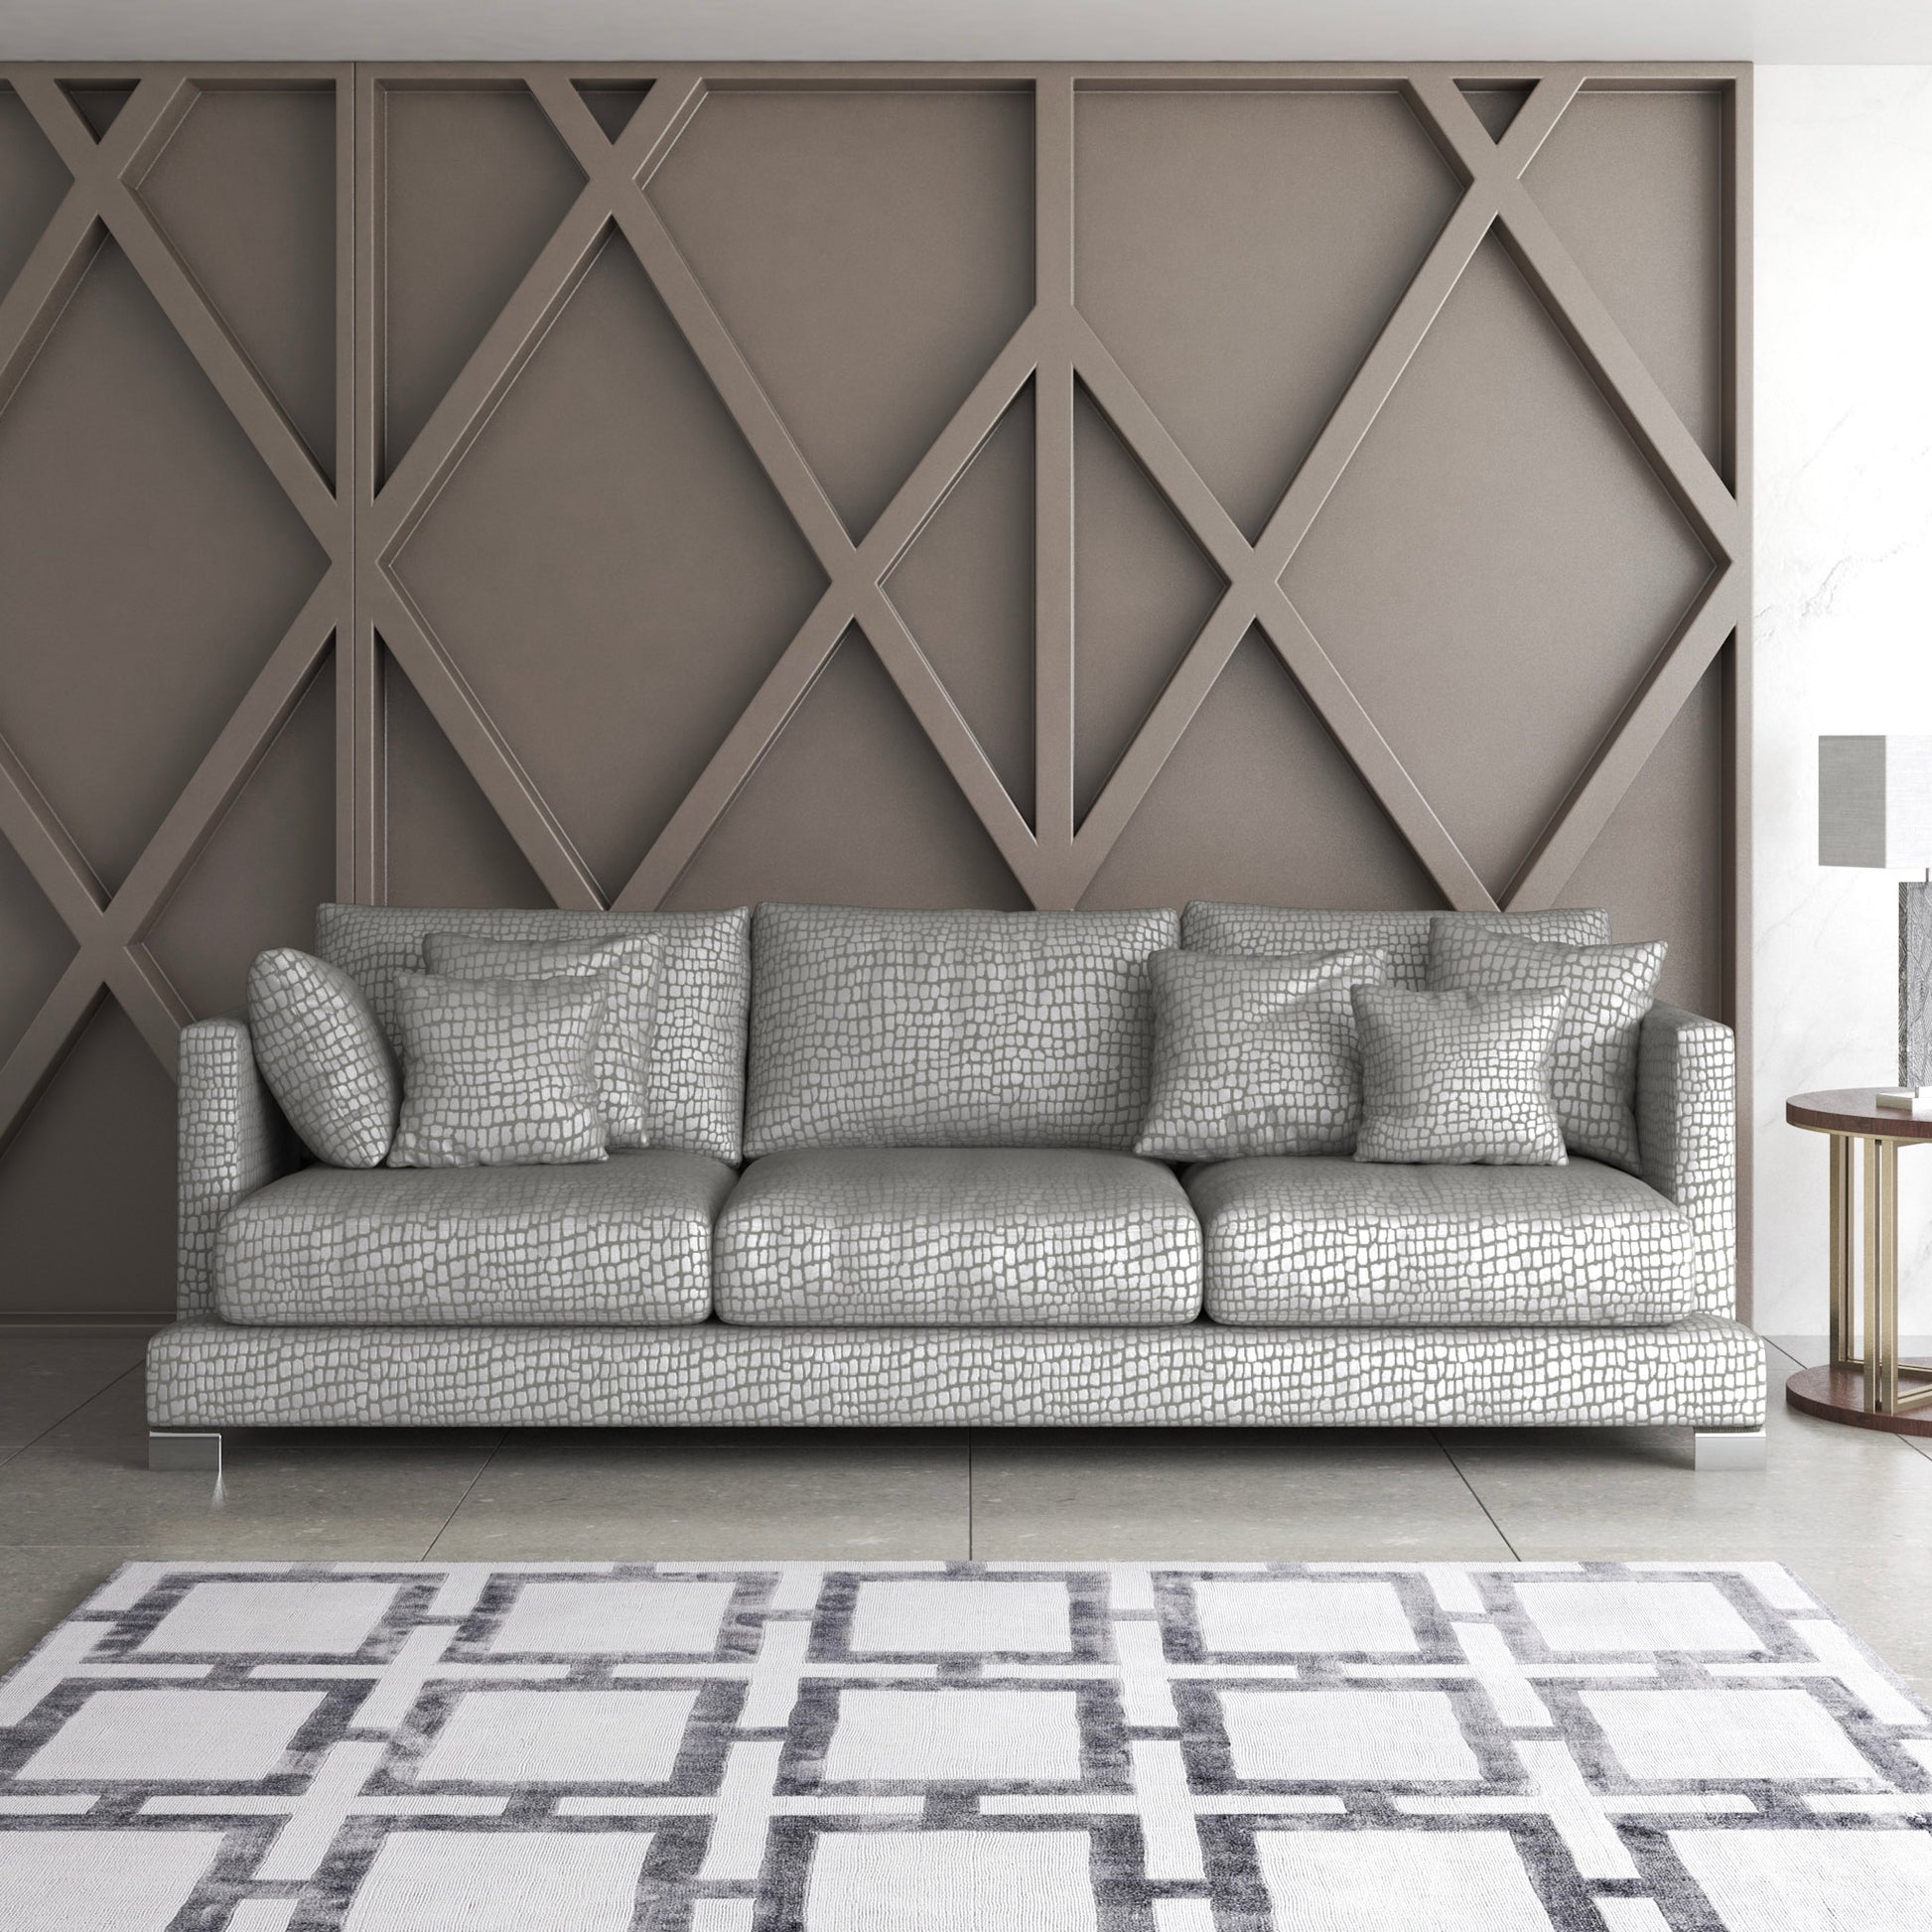 Cazador fabric part of the Sauvage collection shown on a sofa with geometric wooden wall and rug